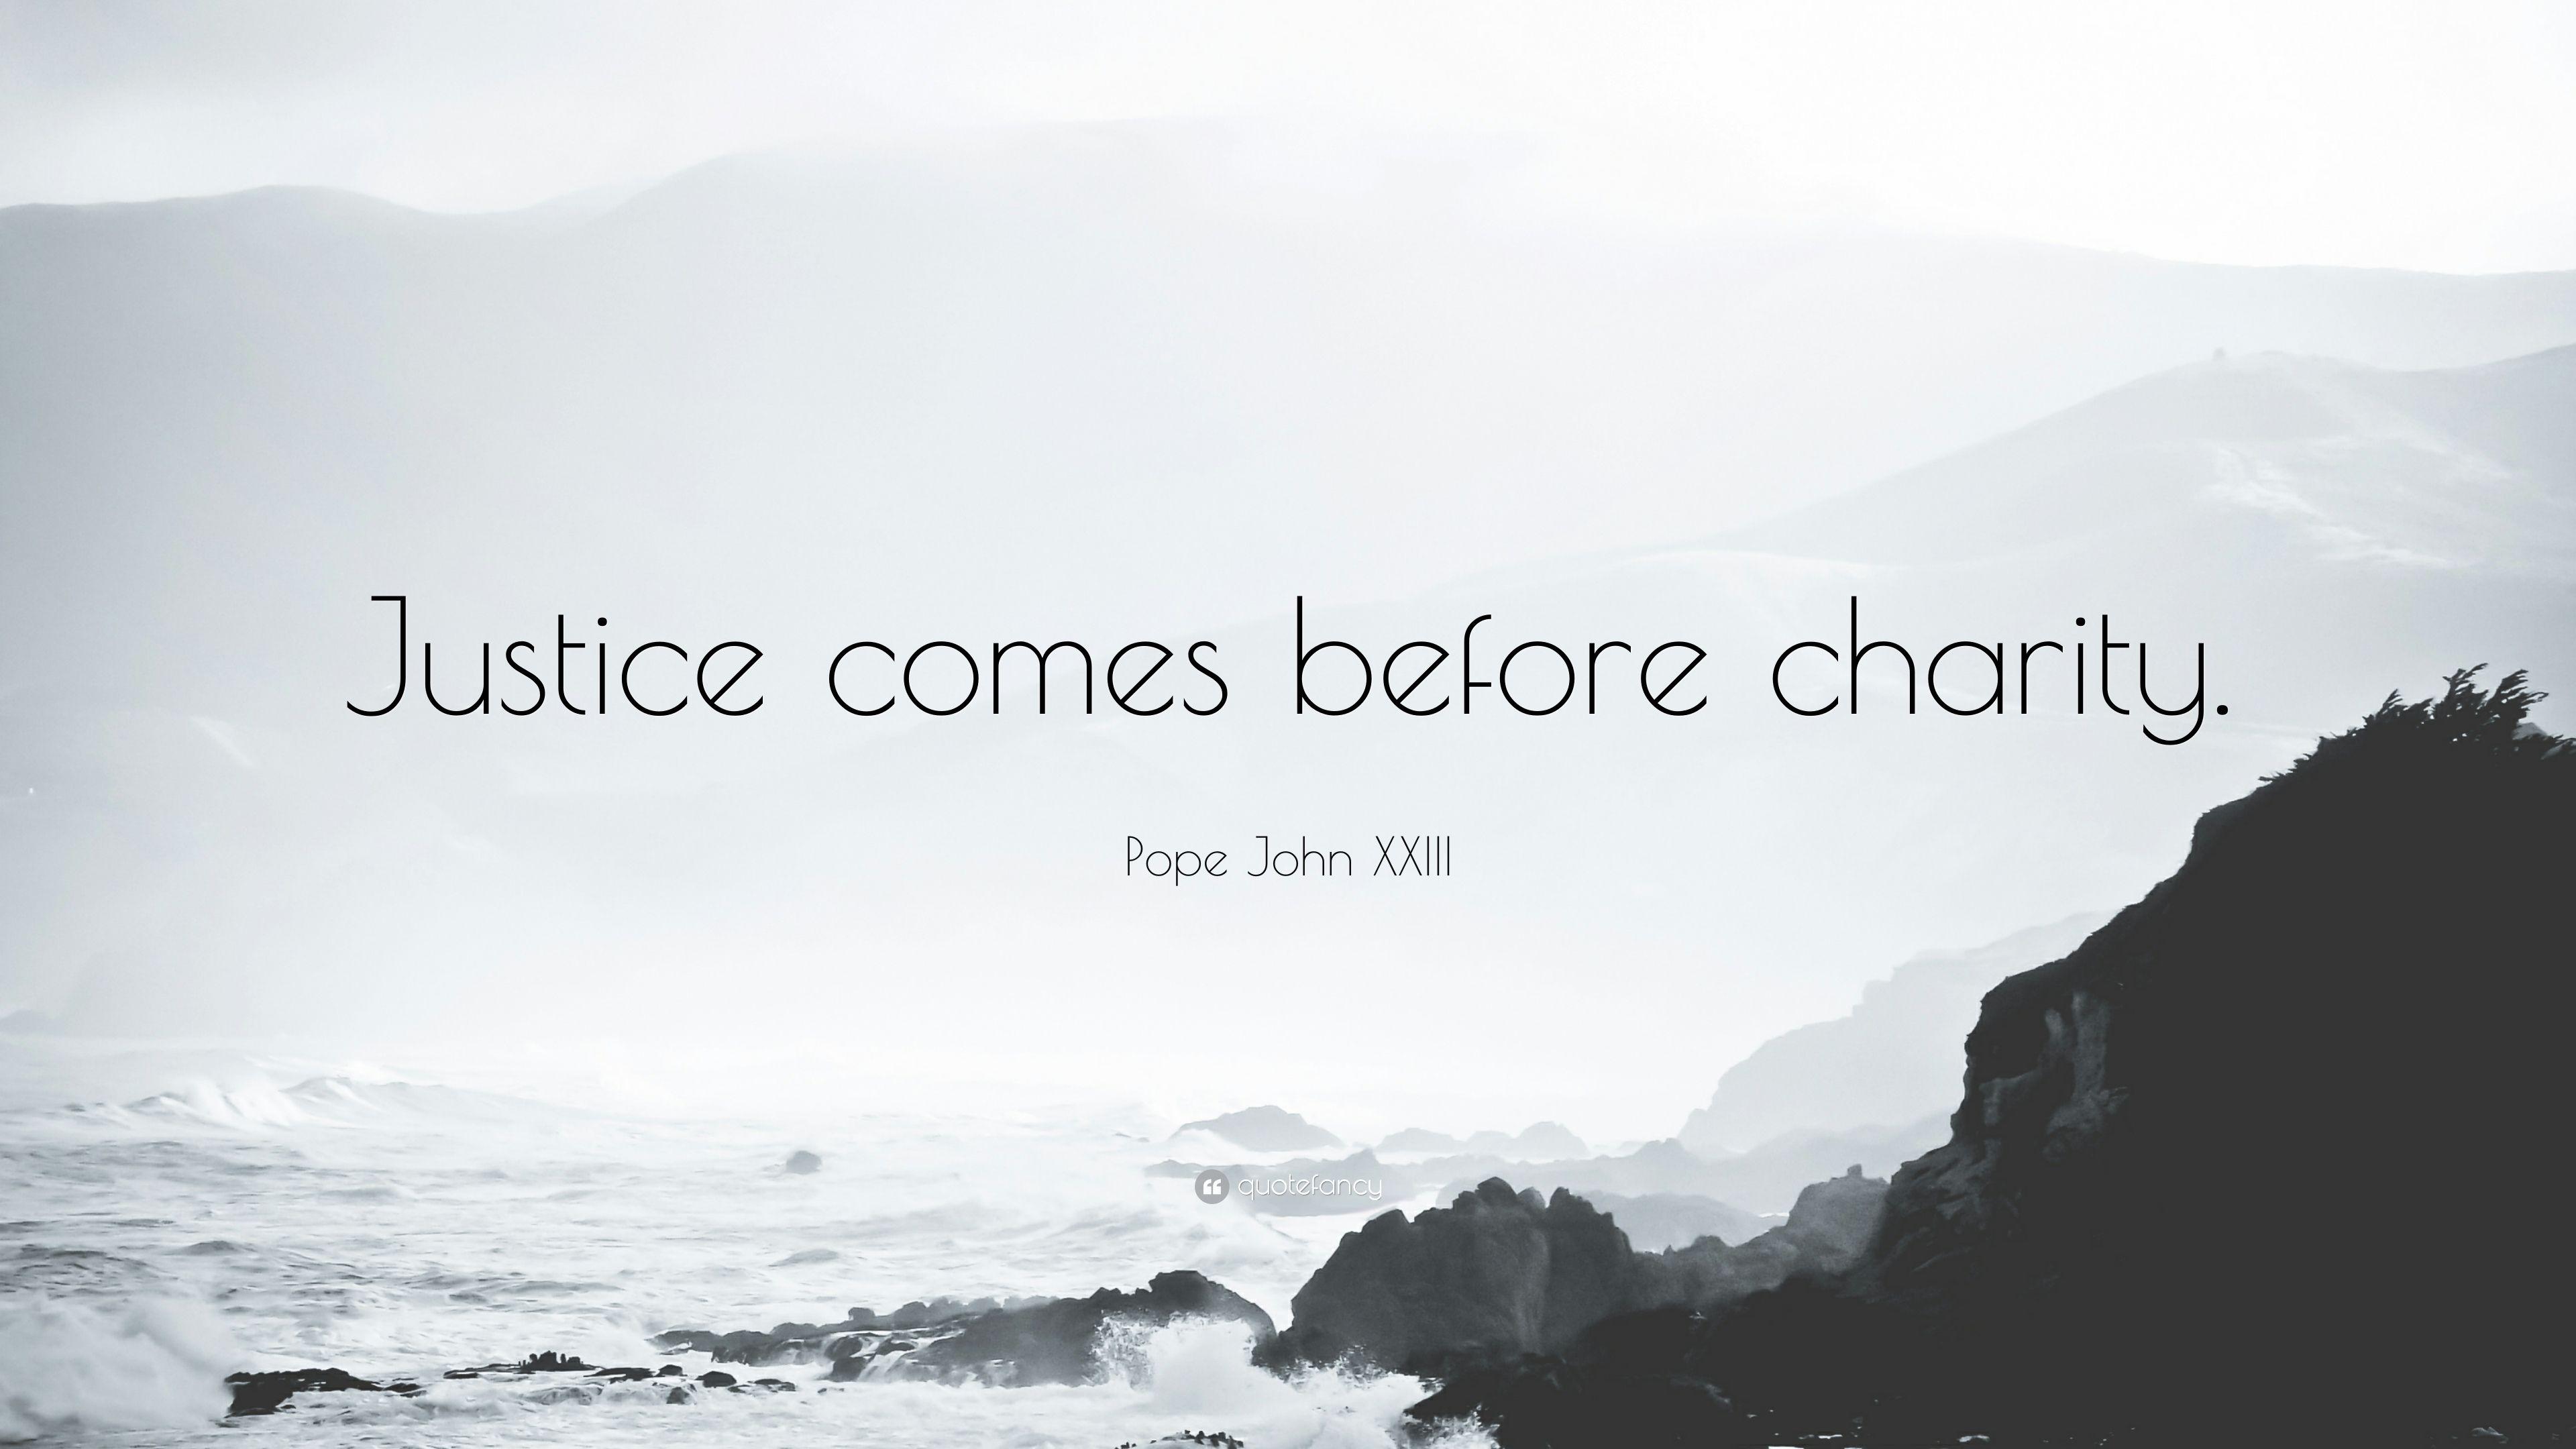 Pope John XXIII Quote: “Justice comes before charity.” 7 wallpaper